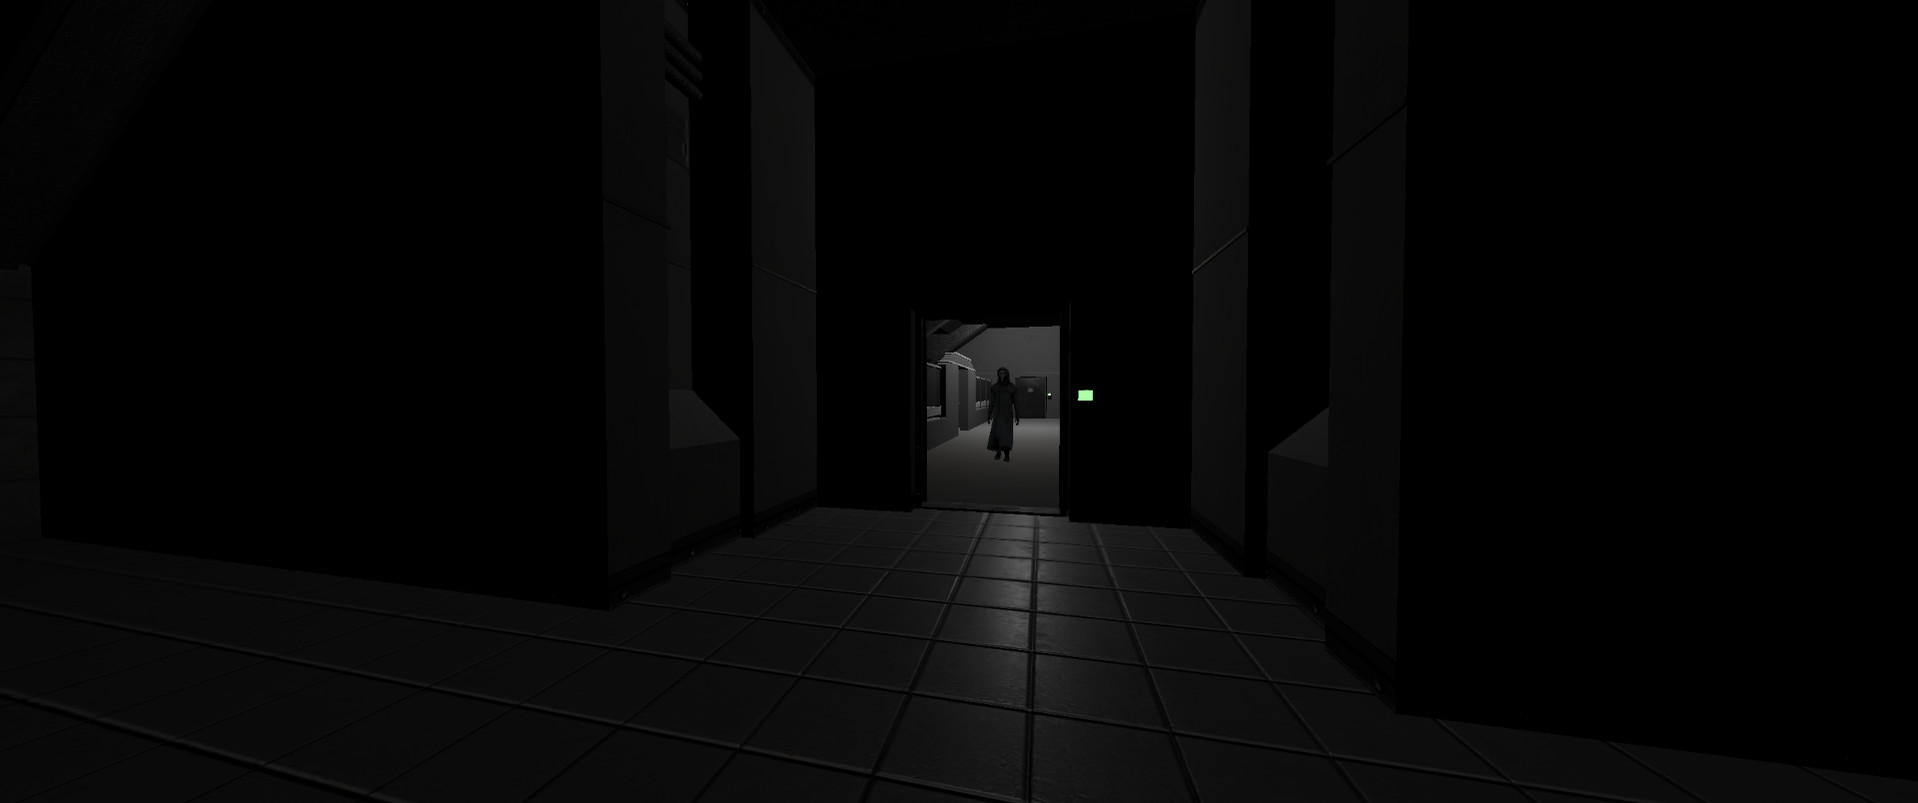 GitHub - creeperlv/SCP-CB-UnityRemake: SCP - Containment Breach Unity  Remake (Not exactly as the same as the original one.)